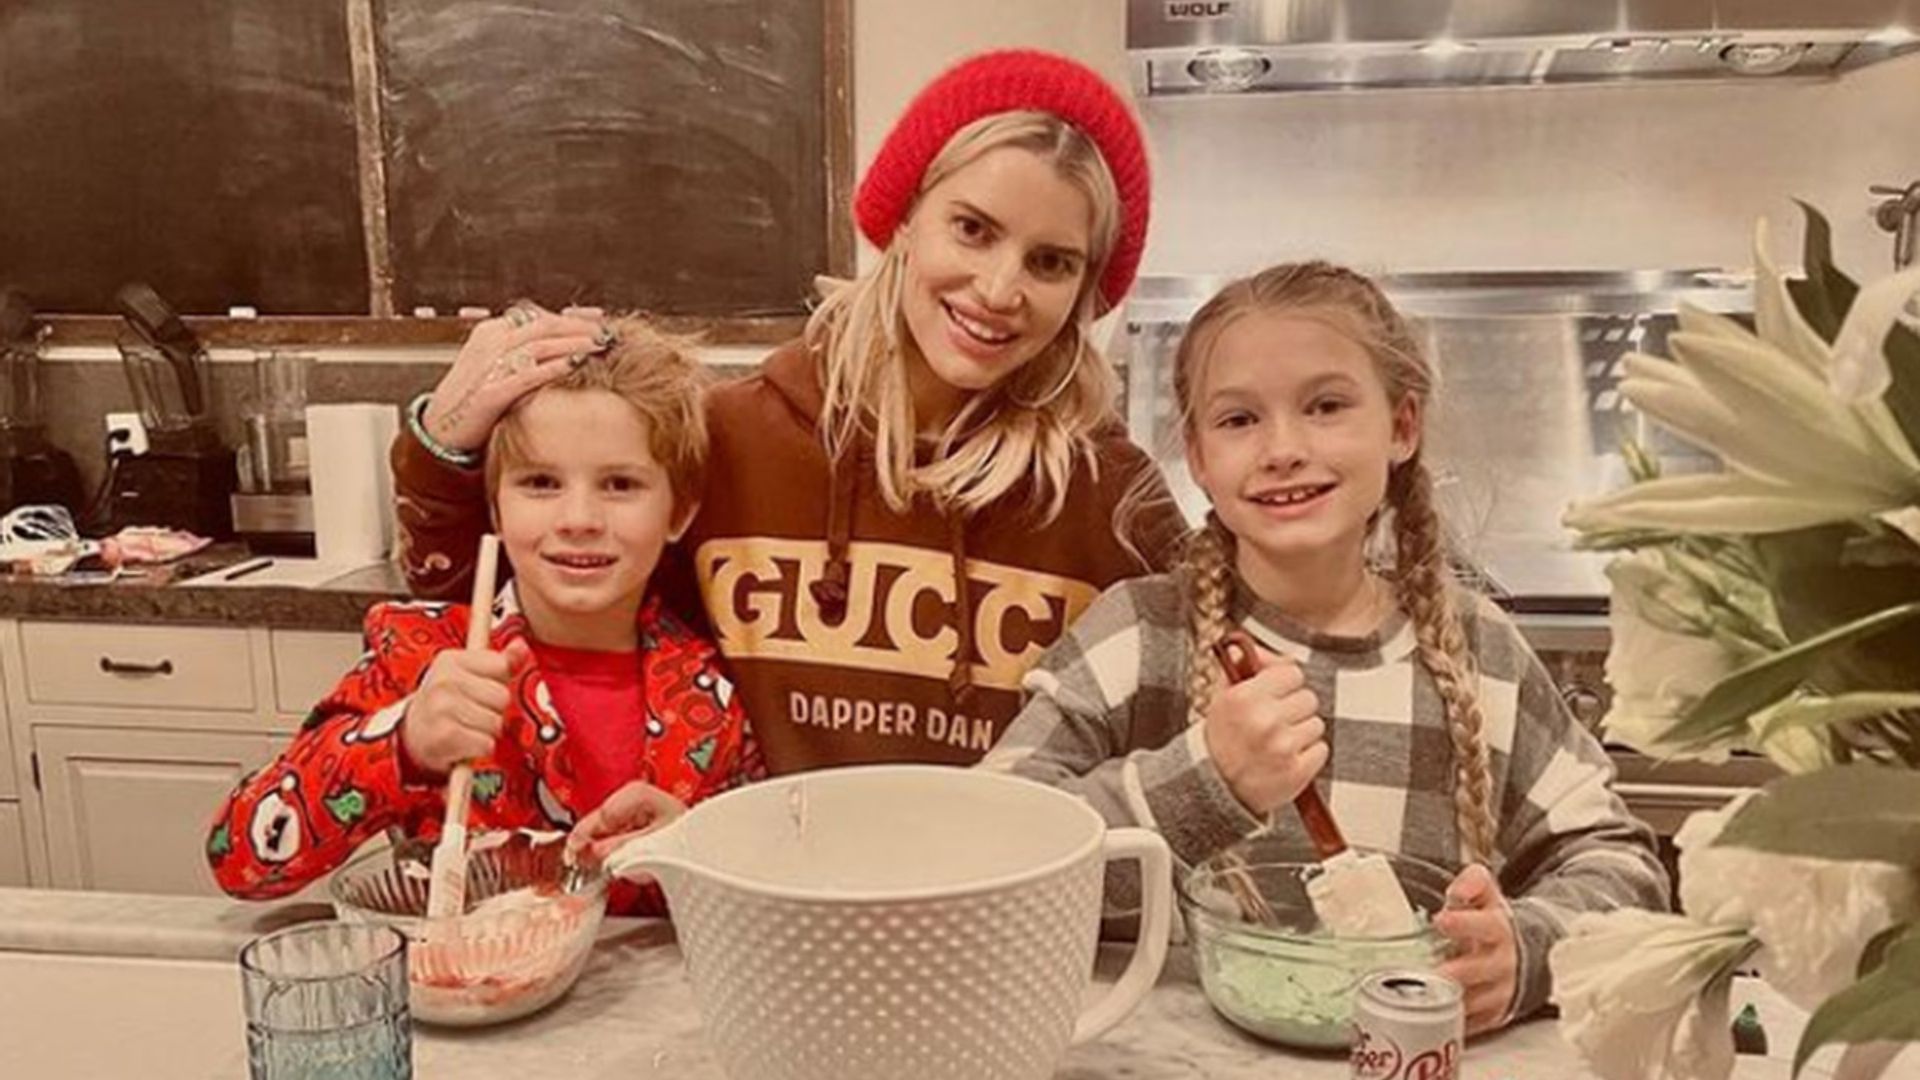 Jessica Simpson's photo of her children at home sparks same reaction from fans